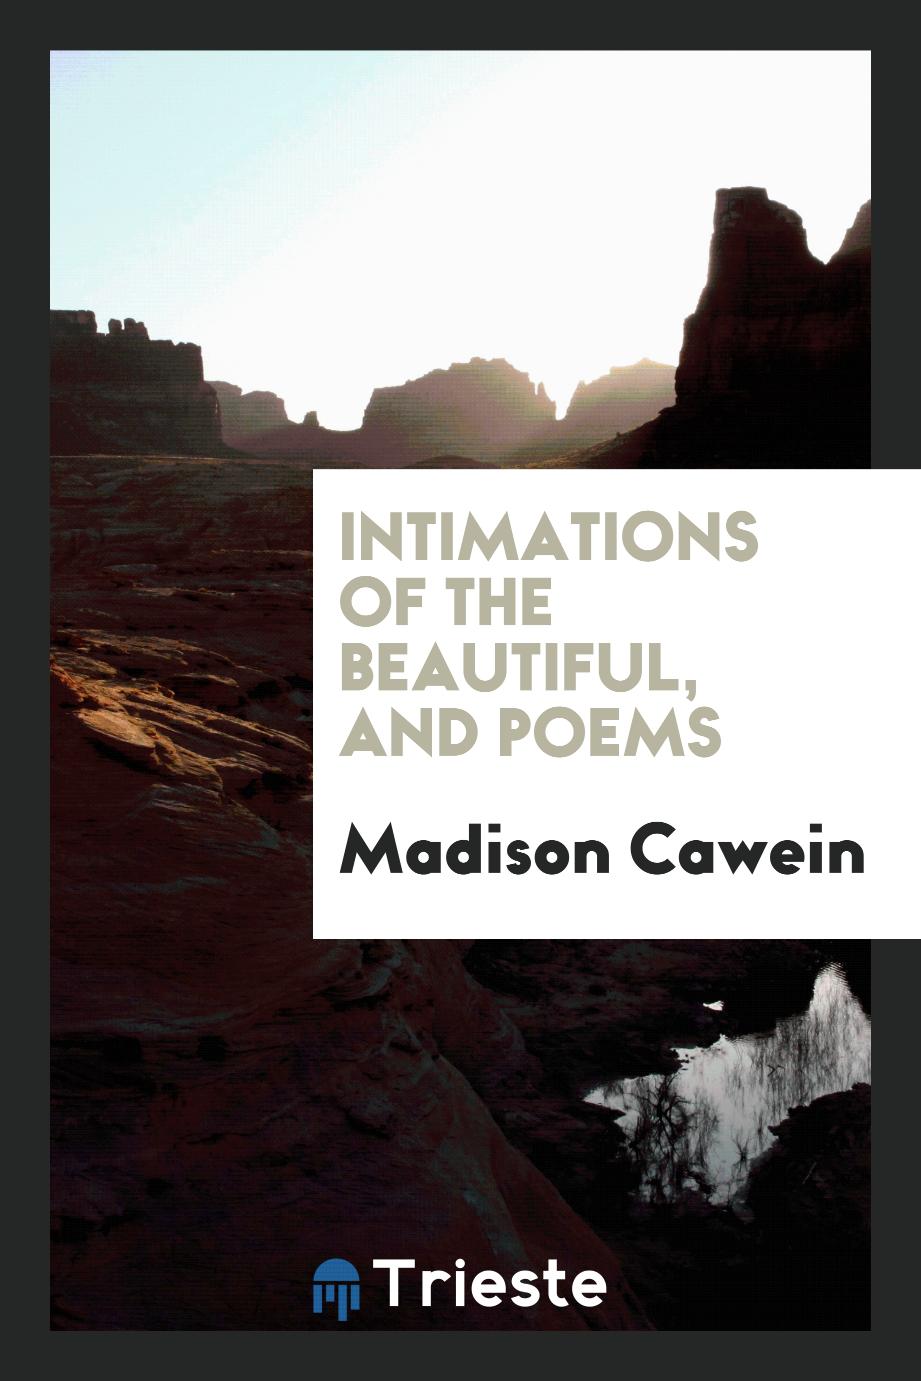 Intimations of the beautiful, and poems